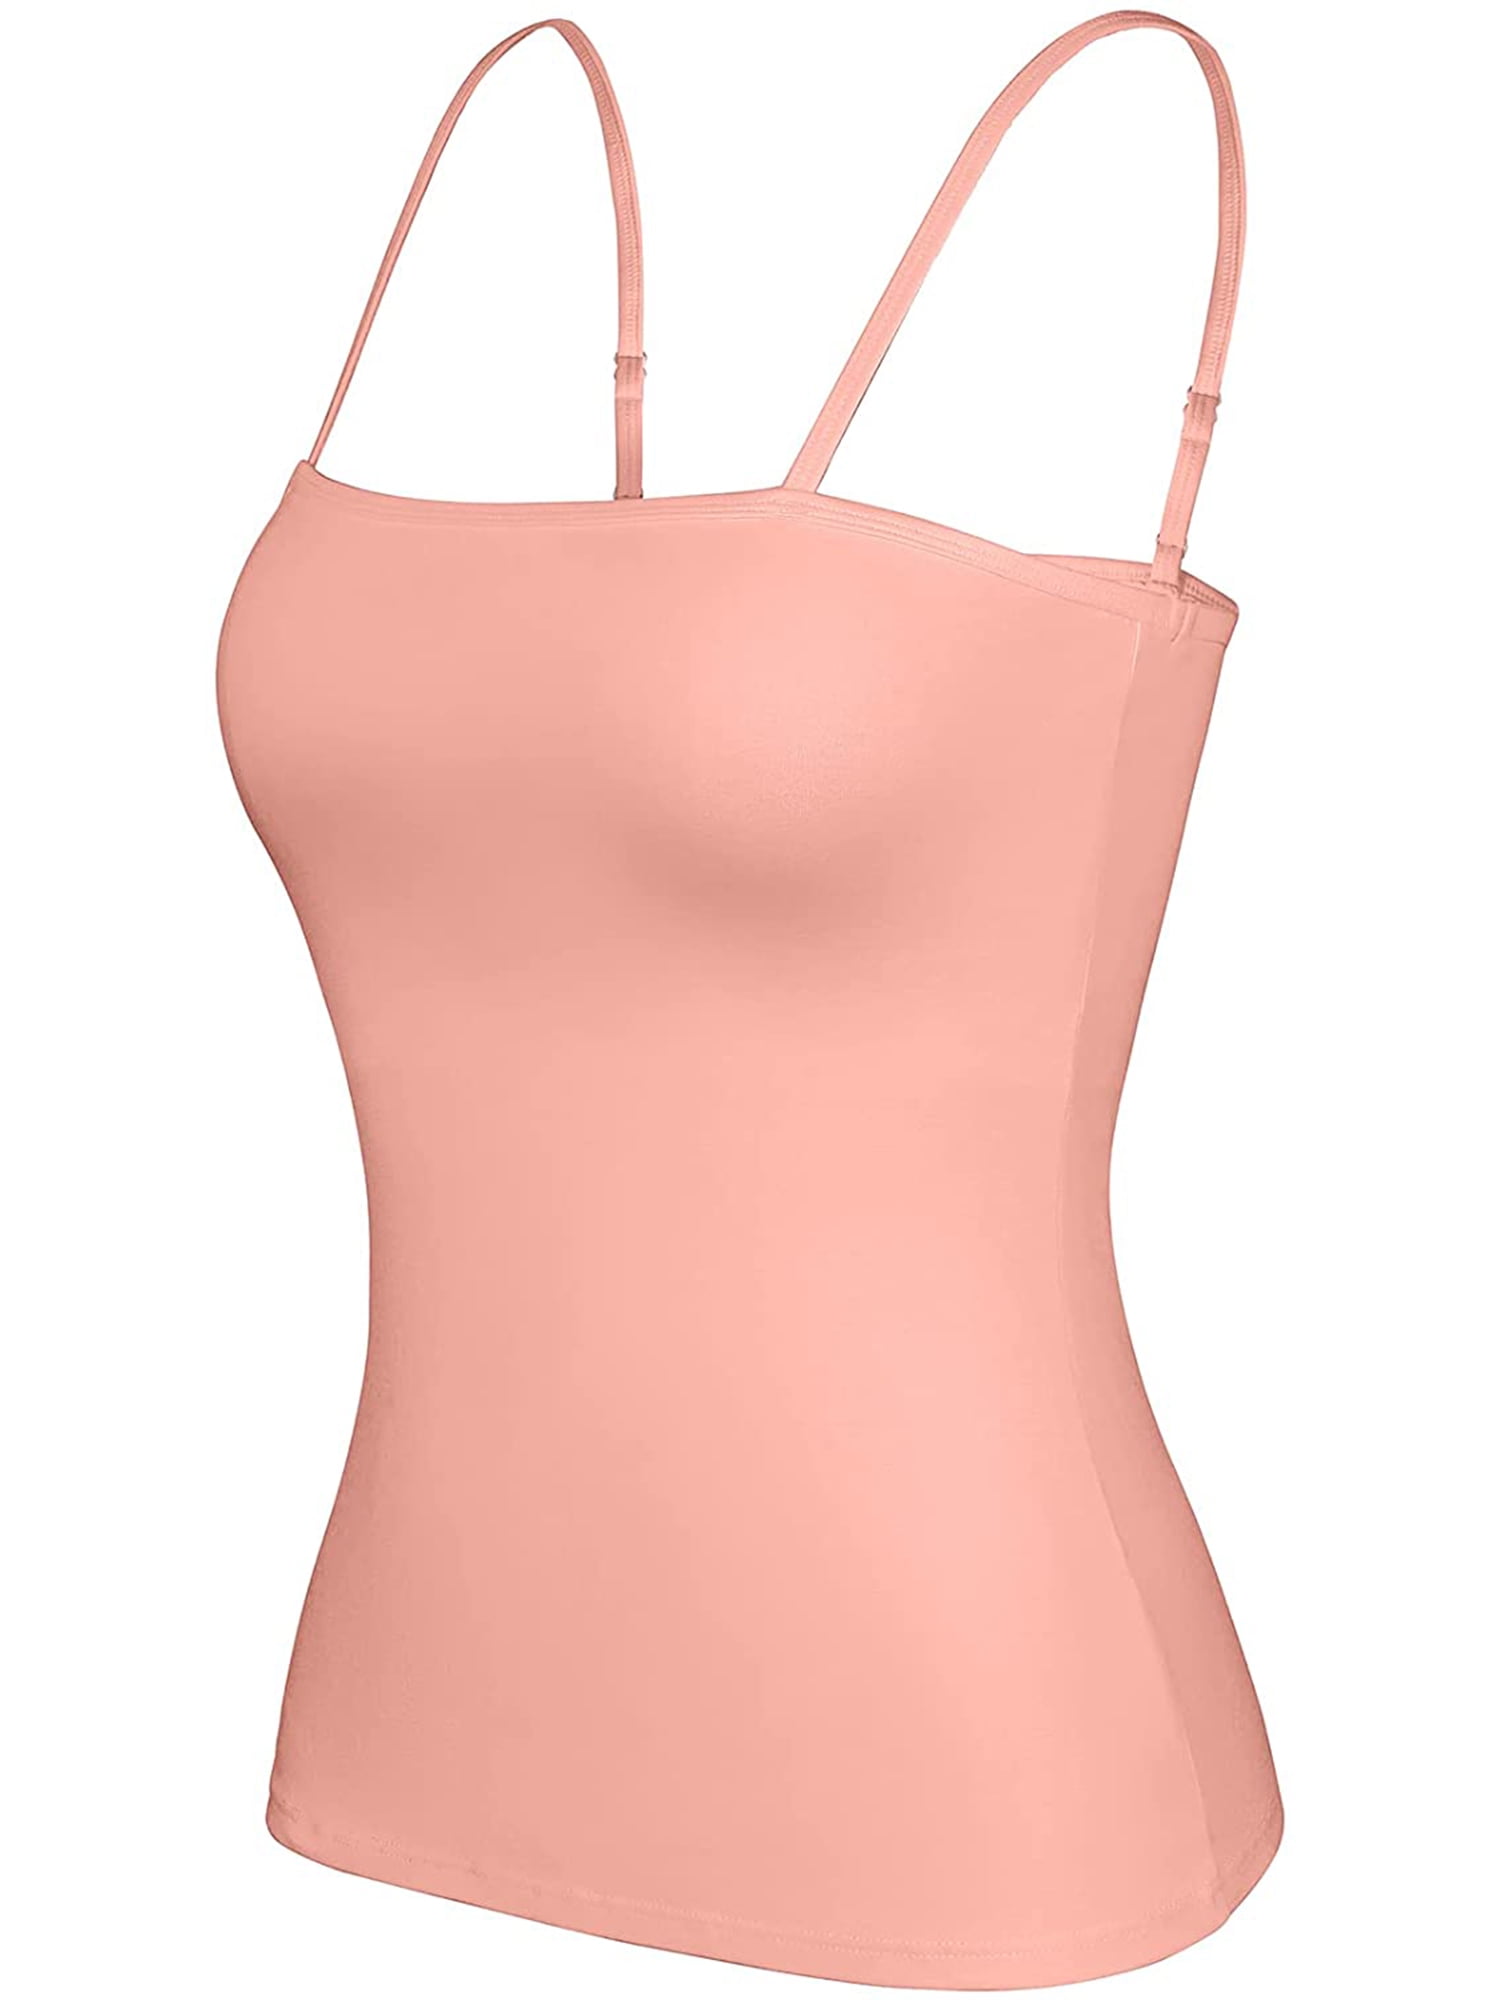 Glamroot Women's Spaghetti Strap Cotton Spandex Padded Camisole with Built  in Bra, Removable Pads,Free Size price in UAE,  UAE